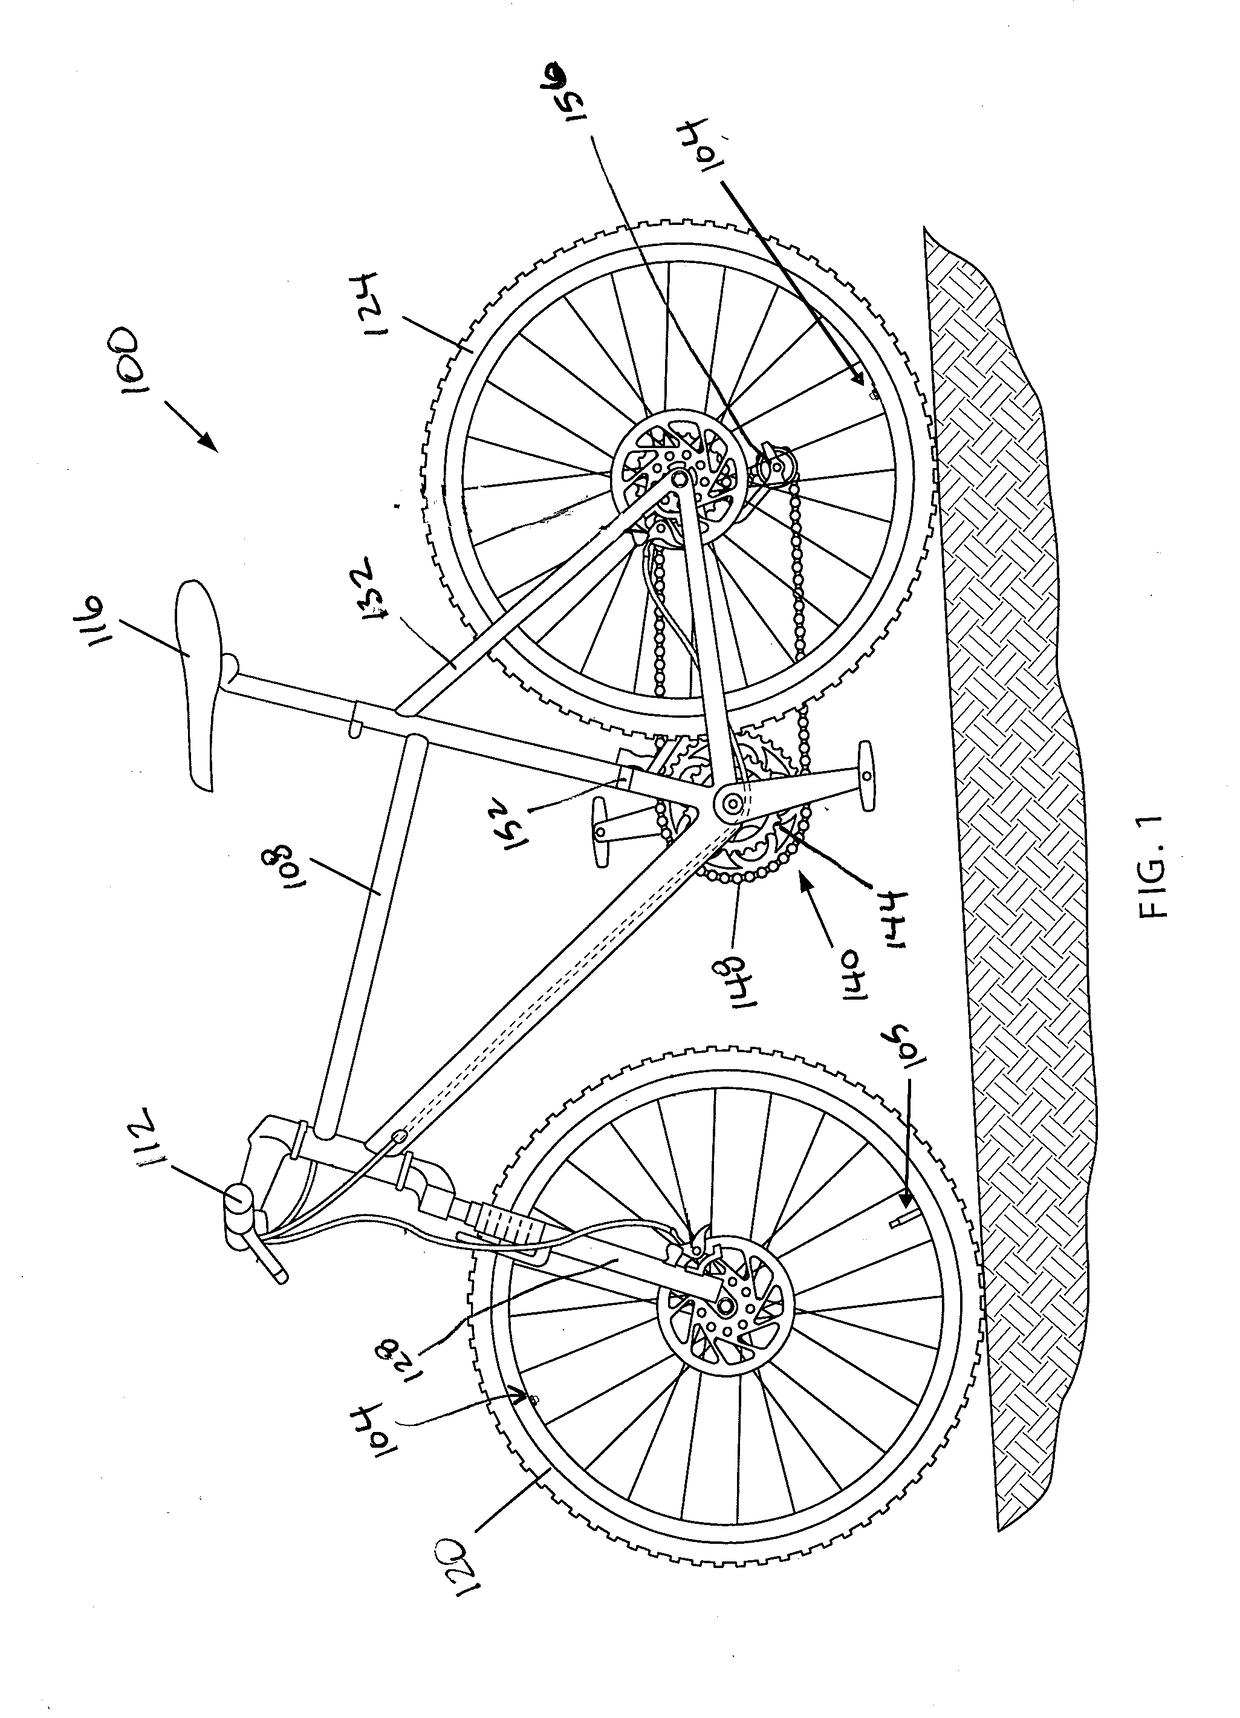 Pressure sensing assembly for a bicycle wheel